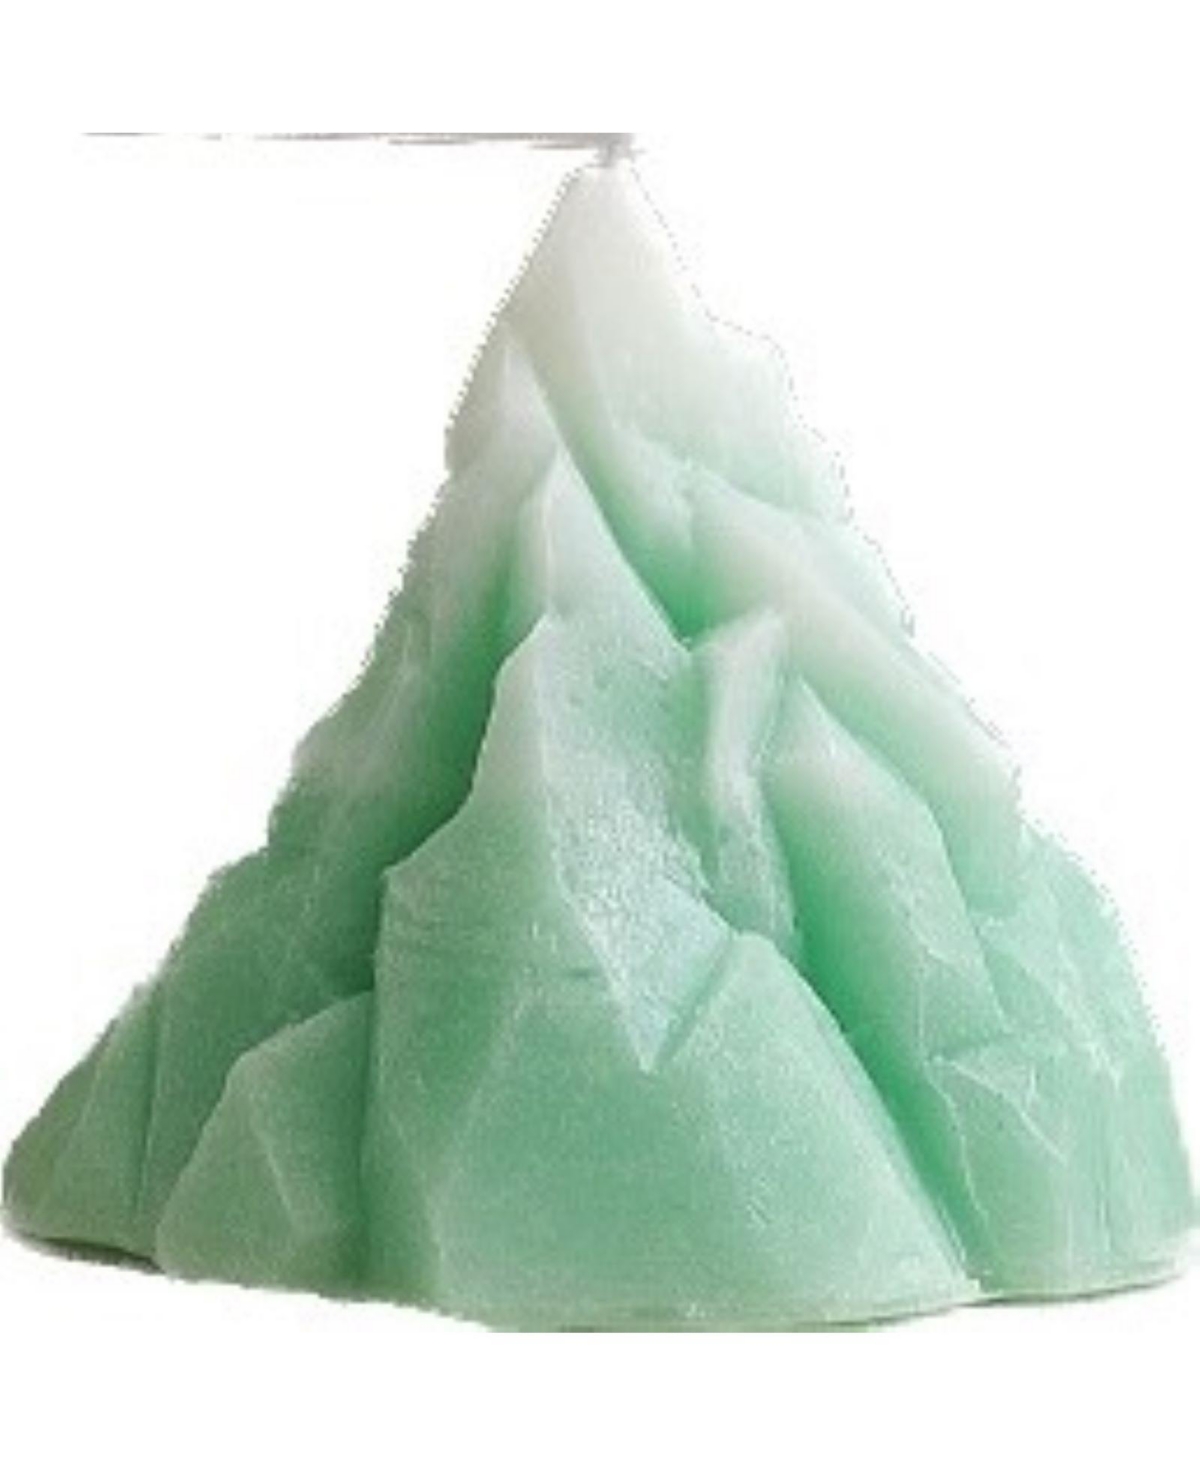 Iceberg 2.6" Scented Candle - Grey